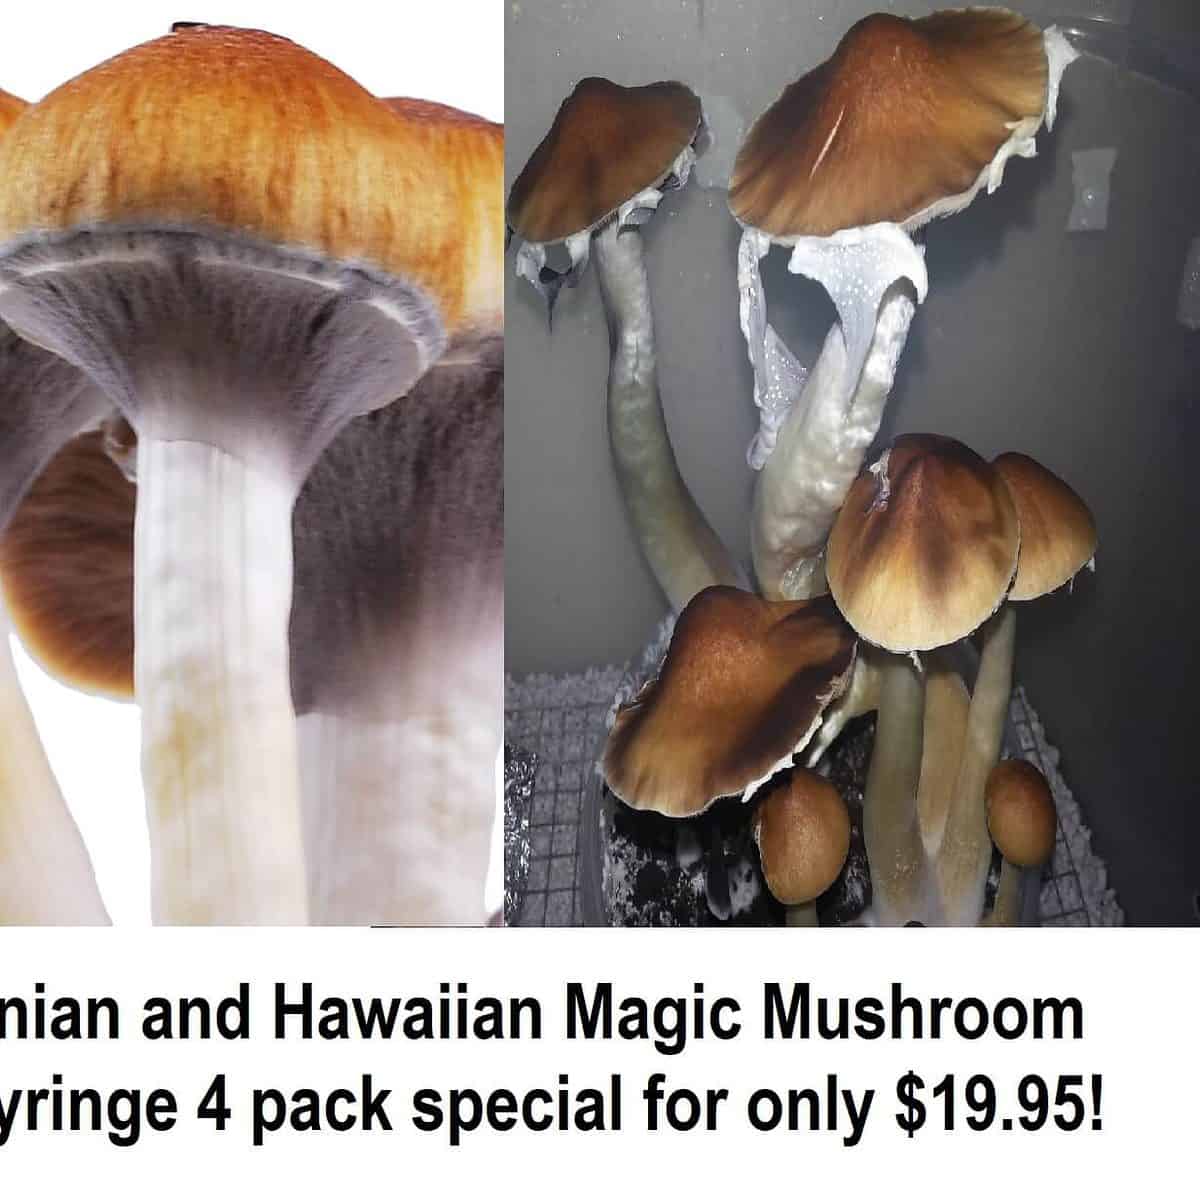 Amazonian and Hawaiian Magic Mushroom spore syringe 4 pack special for only 19.95